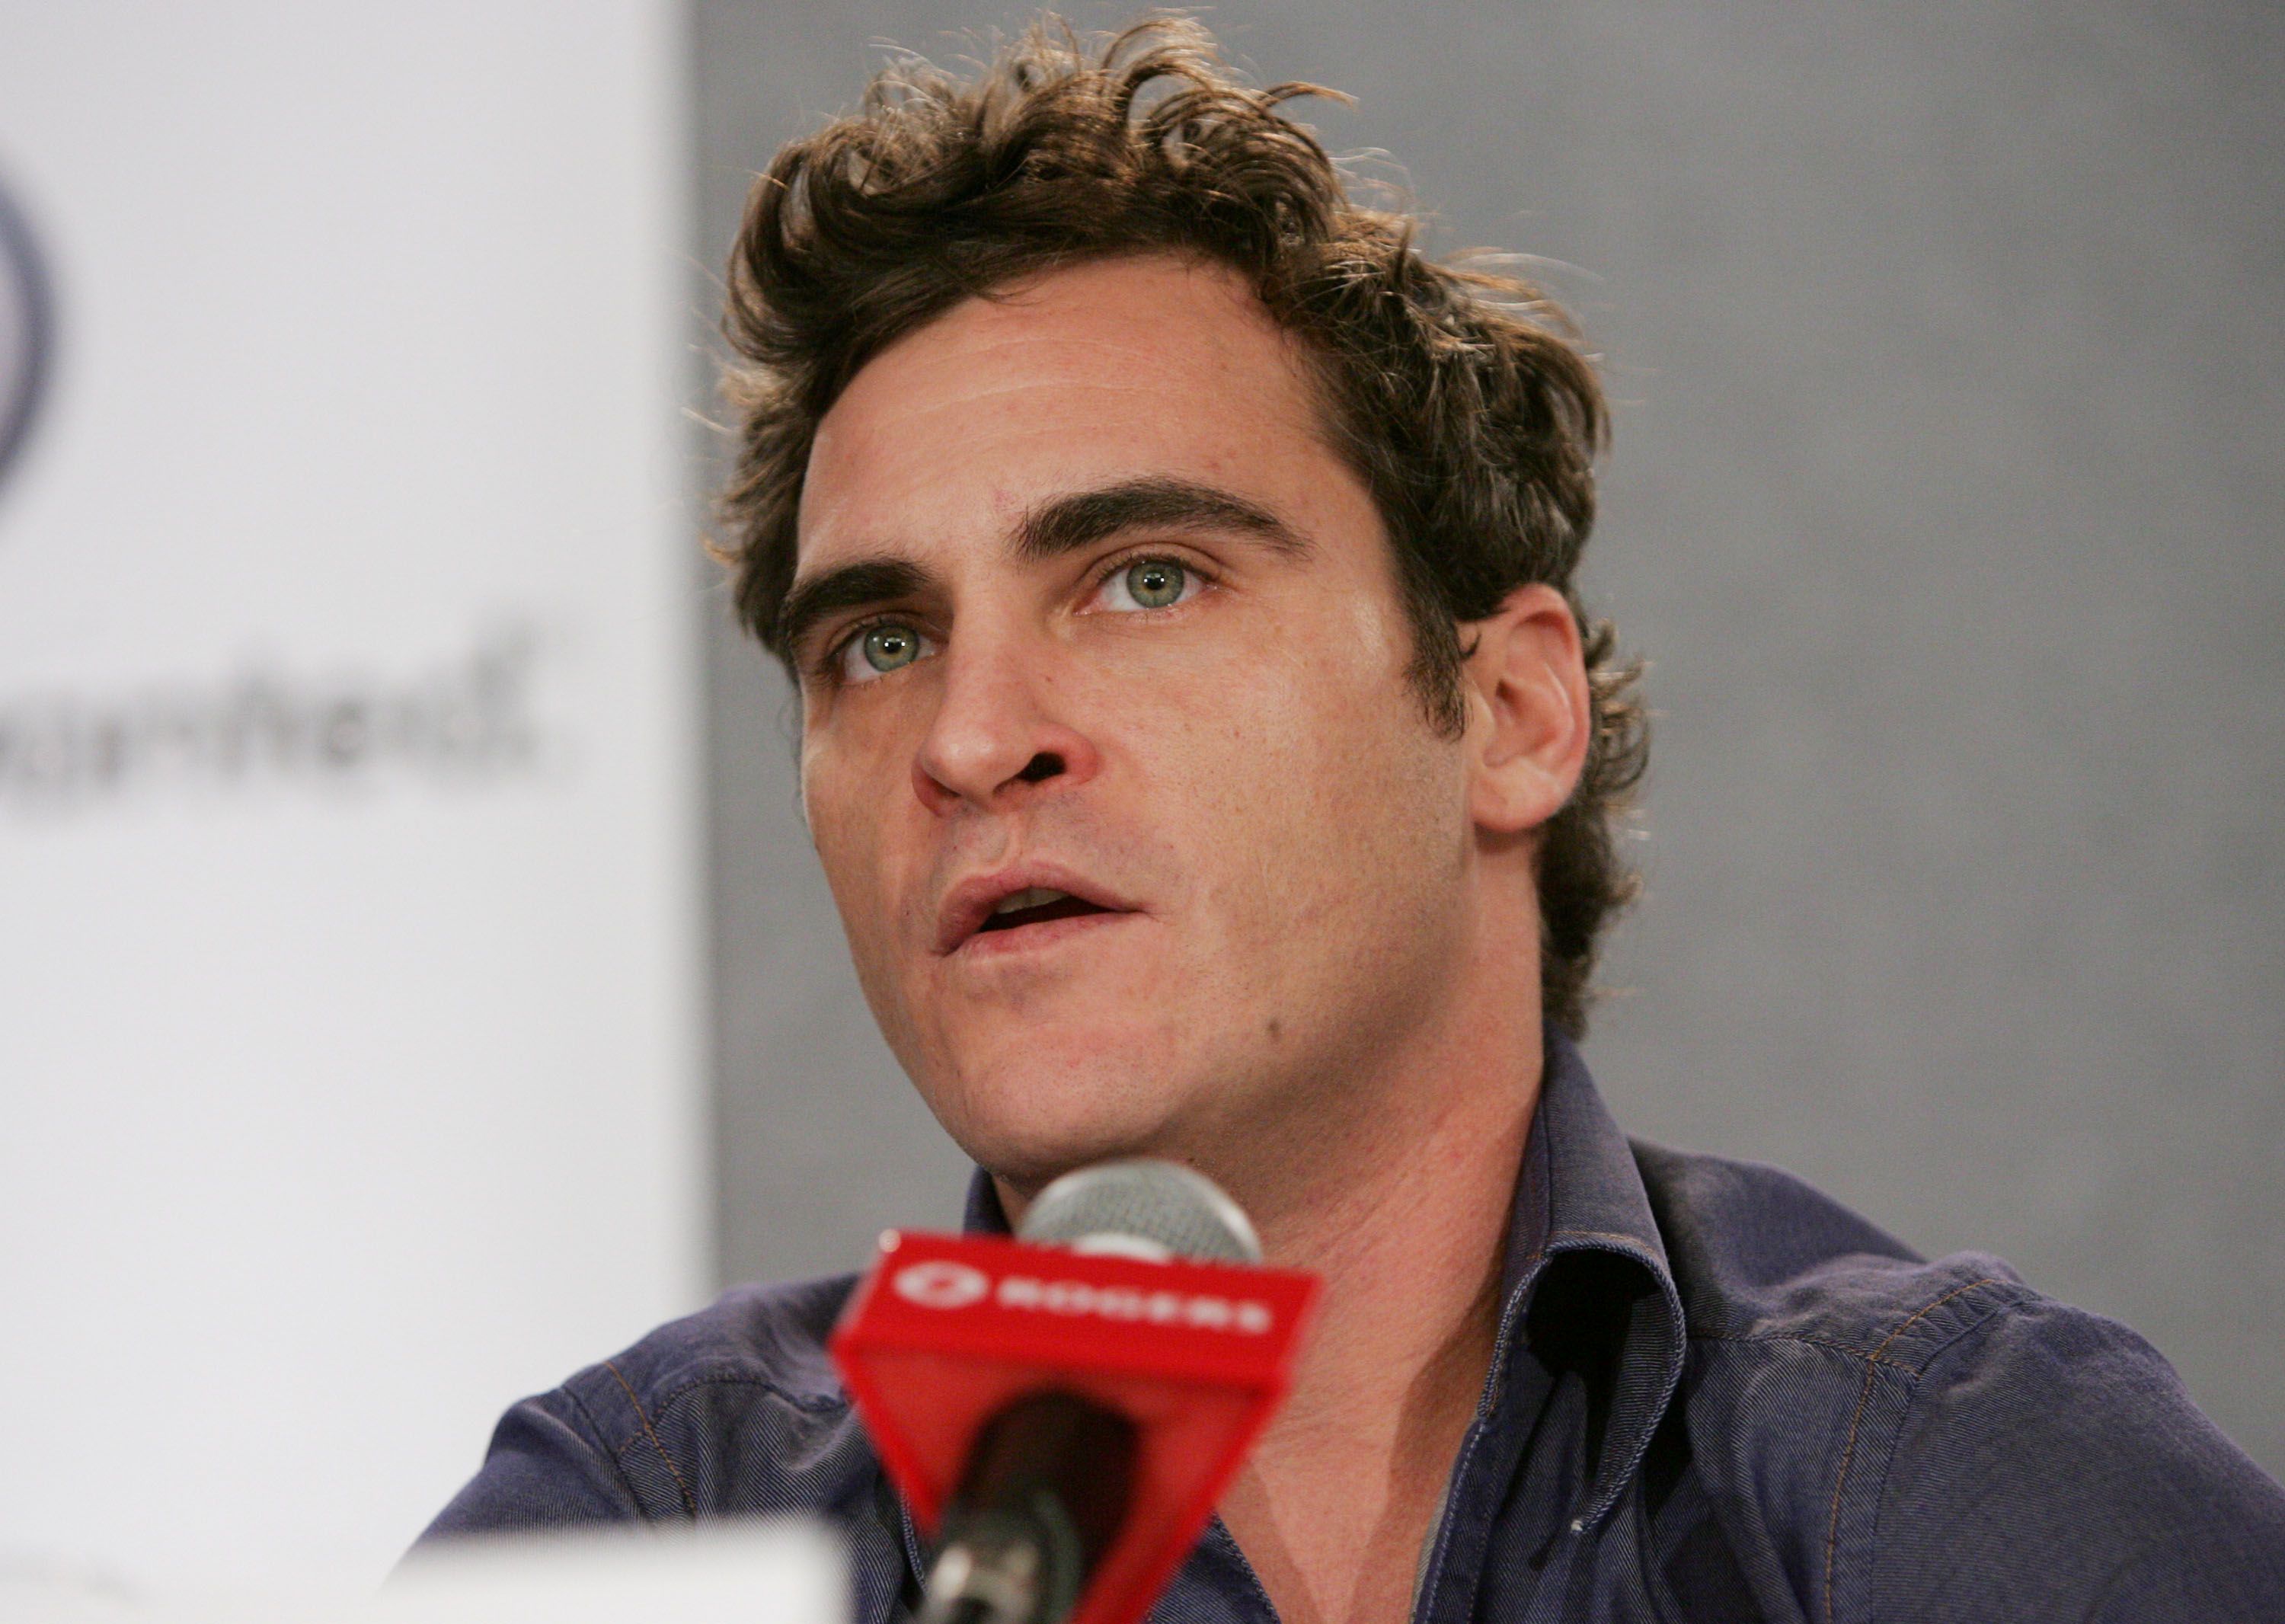 Joaquin Phoenix during the "Walk The Line" press conference during the 2005 Toronto International Film Festival September 13, 2005 in Toronto, Ontario, Canada. | Source: Getty Images